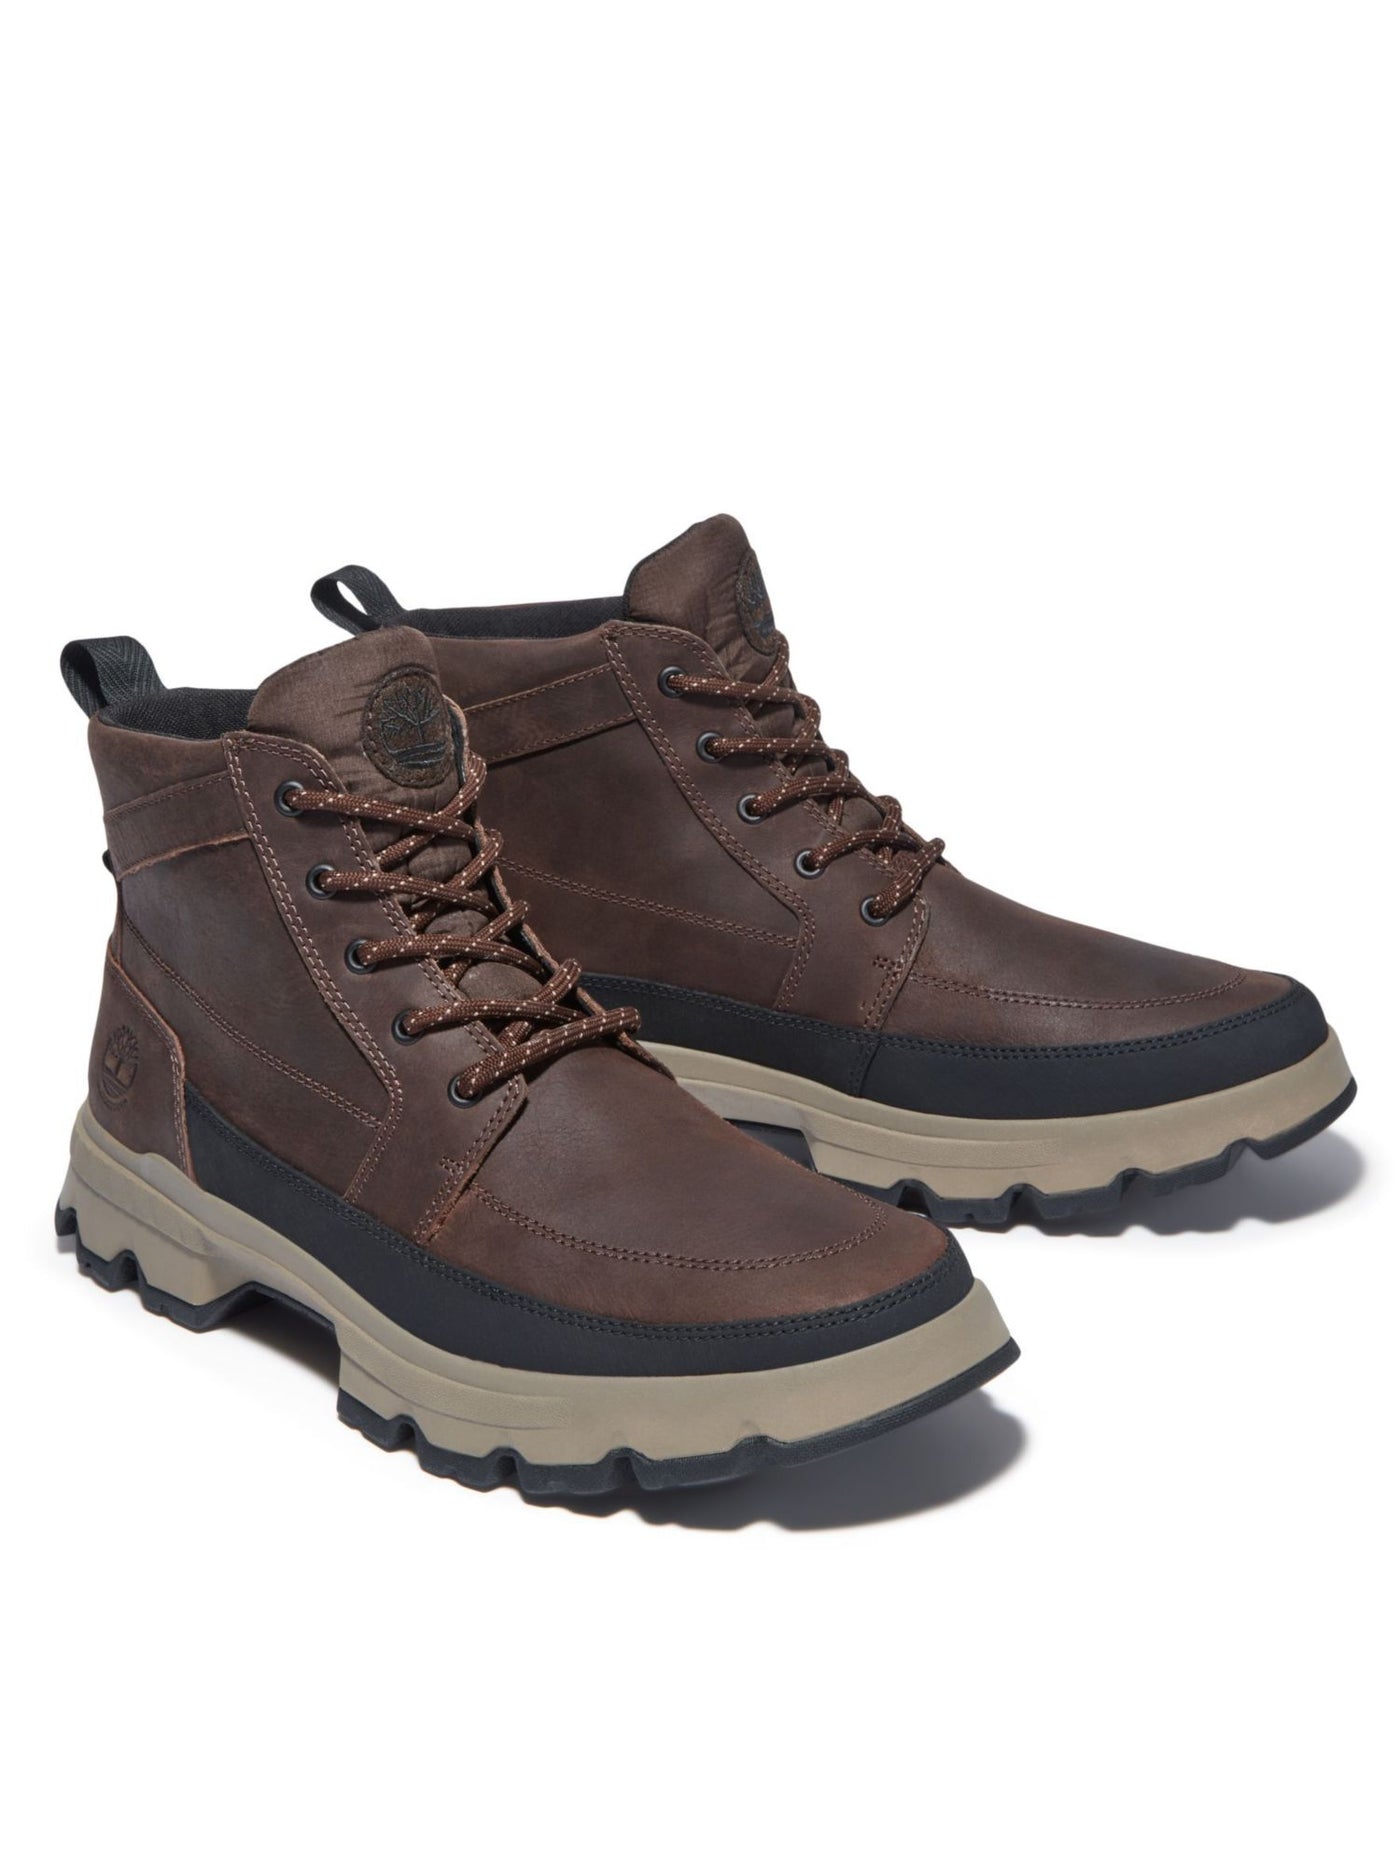 TIMBERLAND Mens Brown Arch Support Water Resistant Round Toe Lace-Up Boots Shoes 11 M